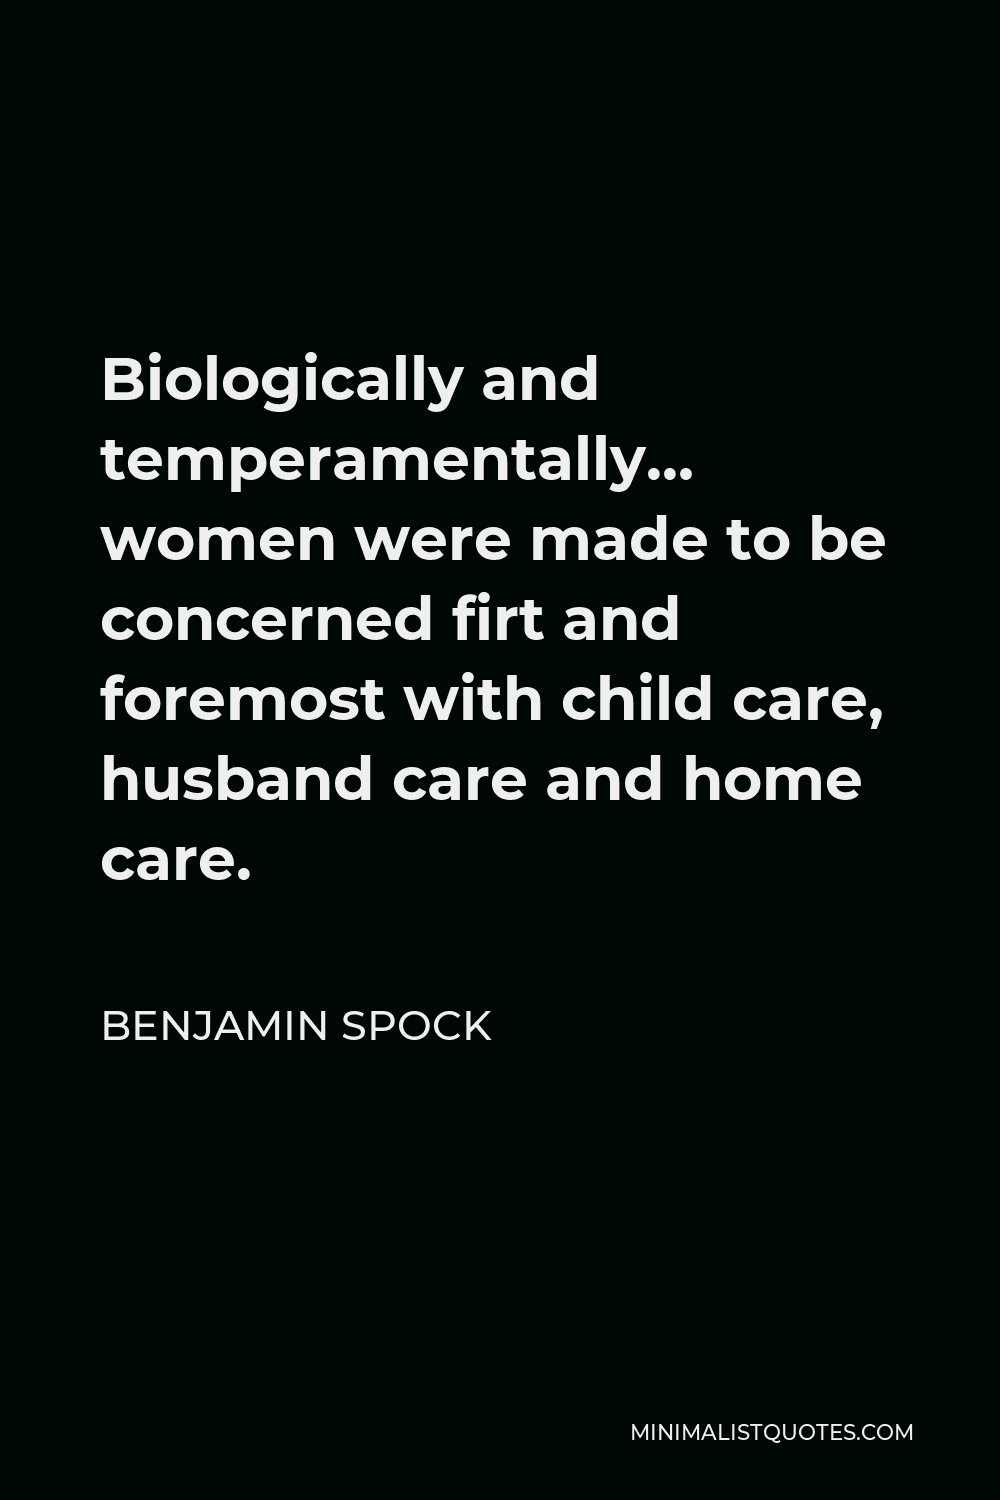 Benjamin Spock Quote - Biologically and temperamentally… women were made to be concerned firt and foremost with child care, husband care and home care.